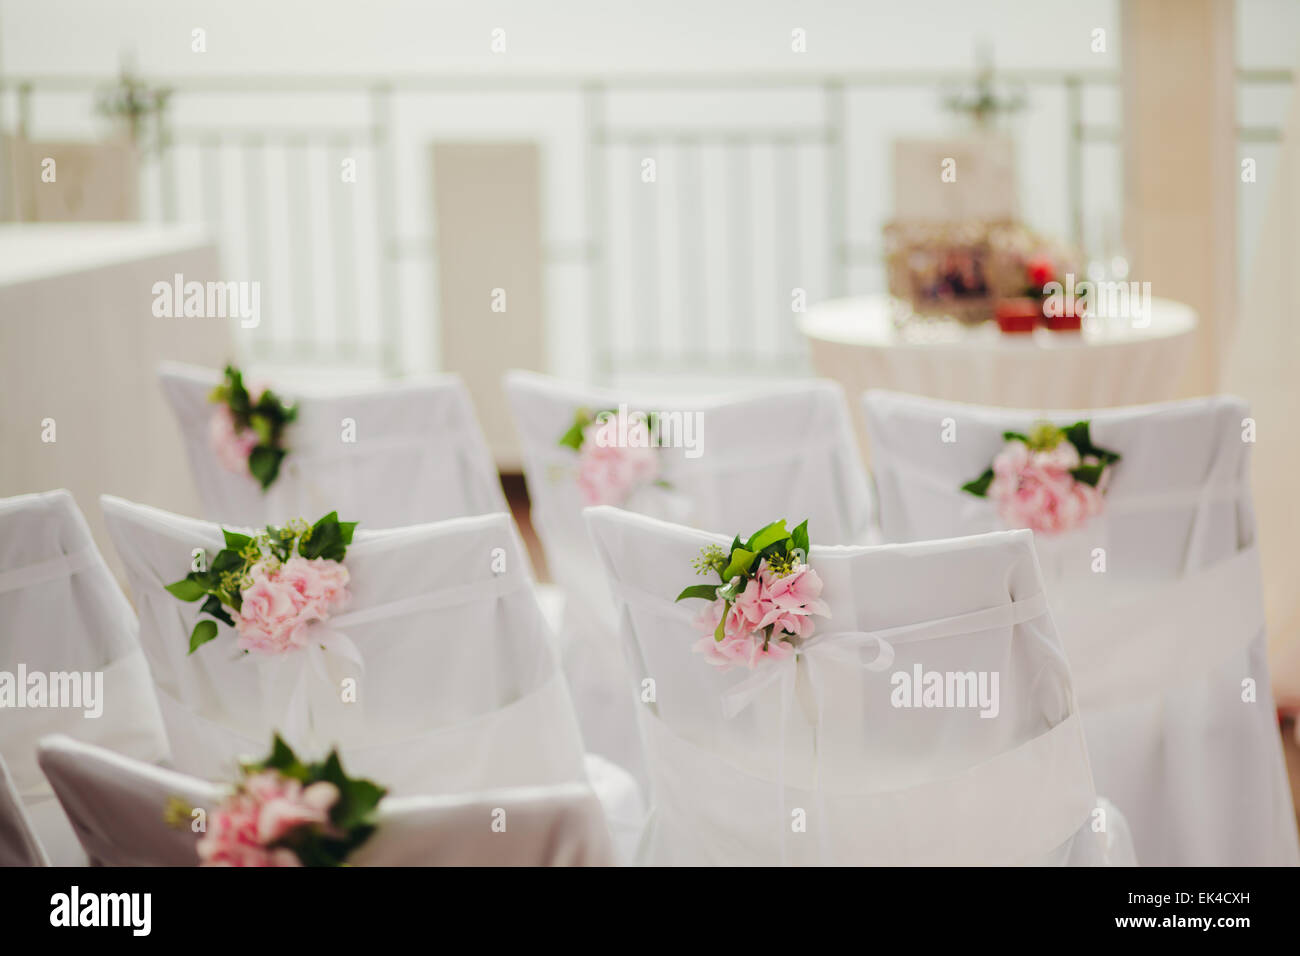 wedding chair covers with pink flowers Stock Photo